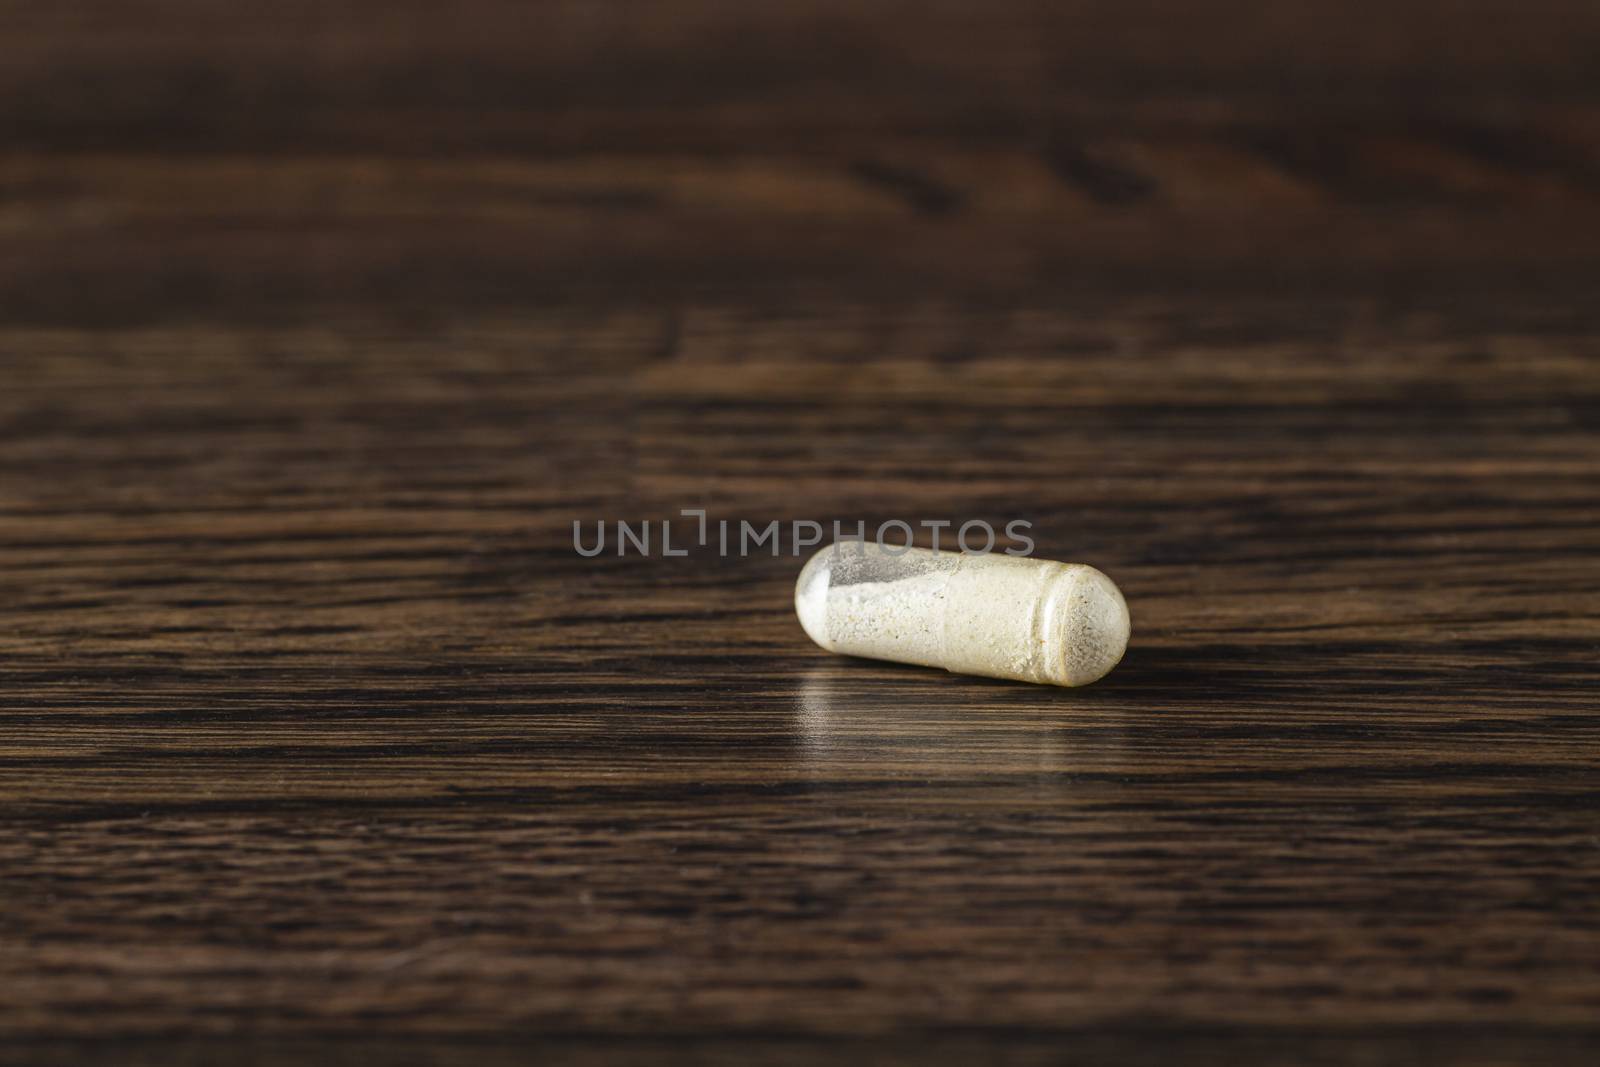 Pill filled with white powder by mypstudio